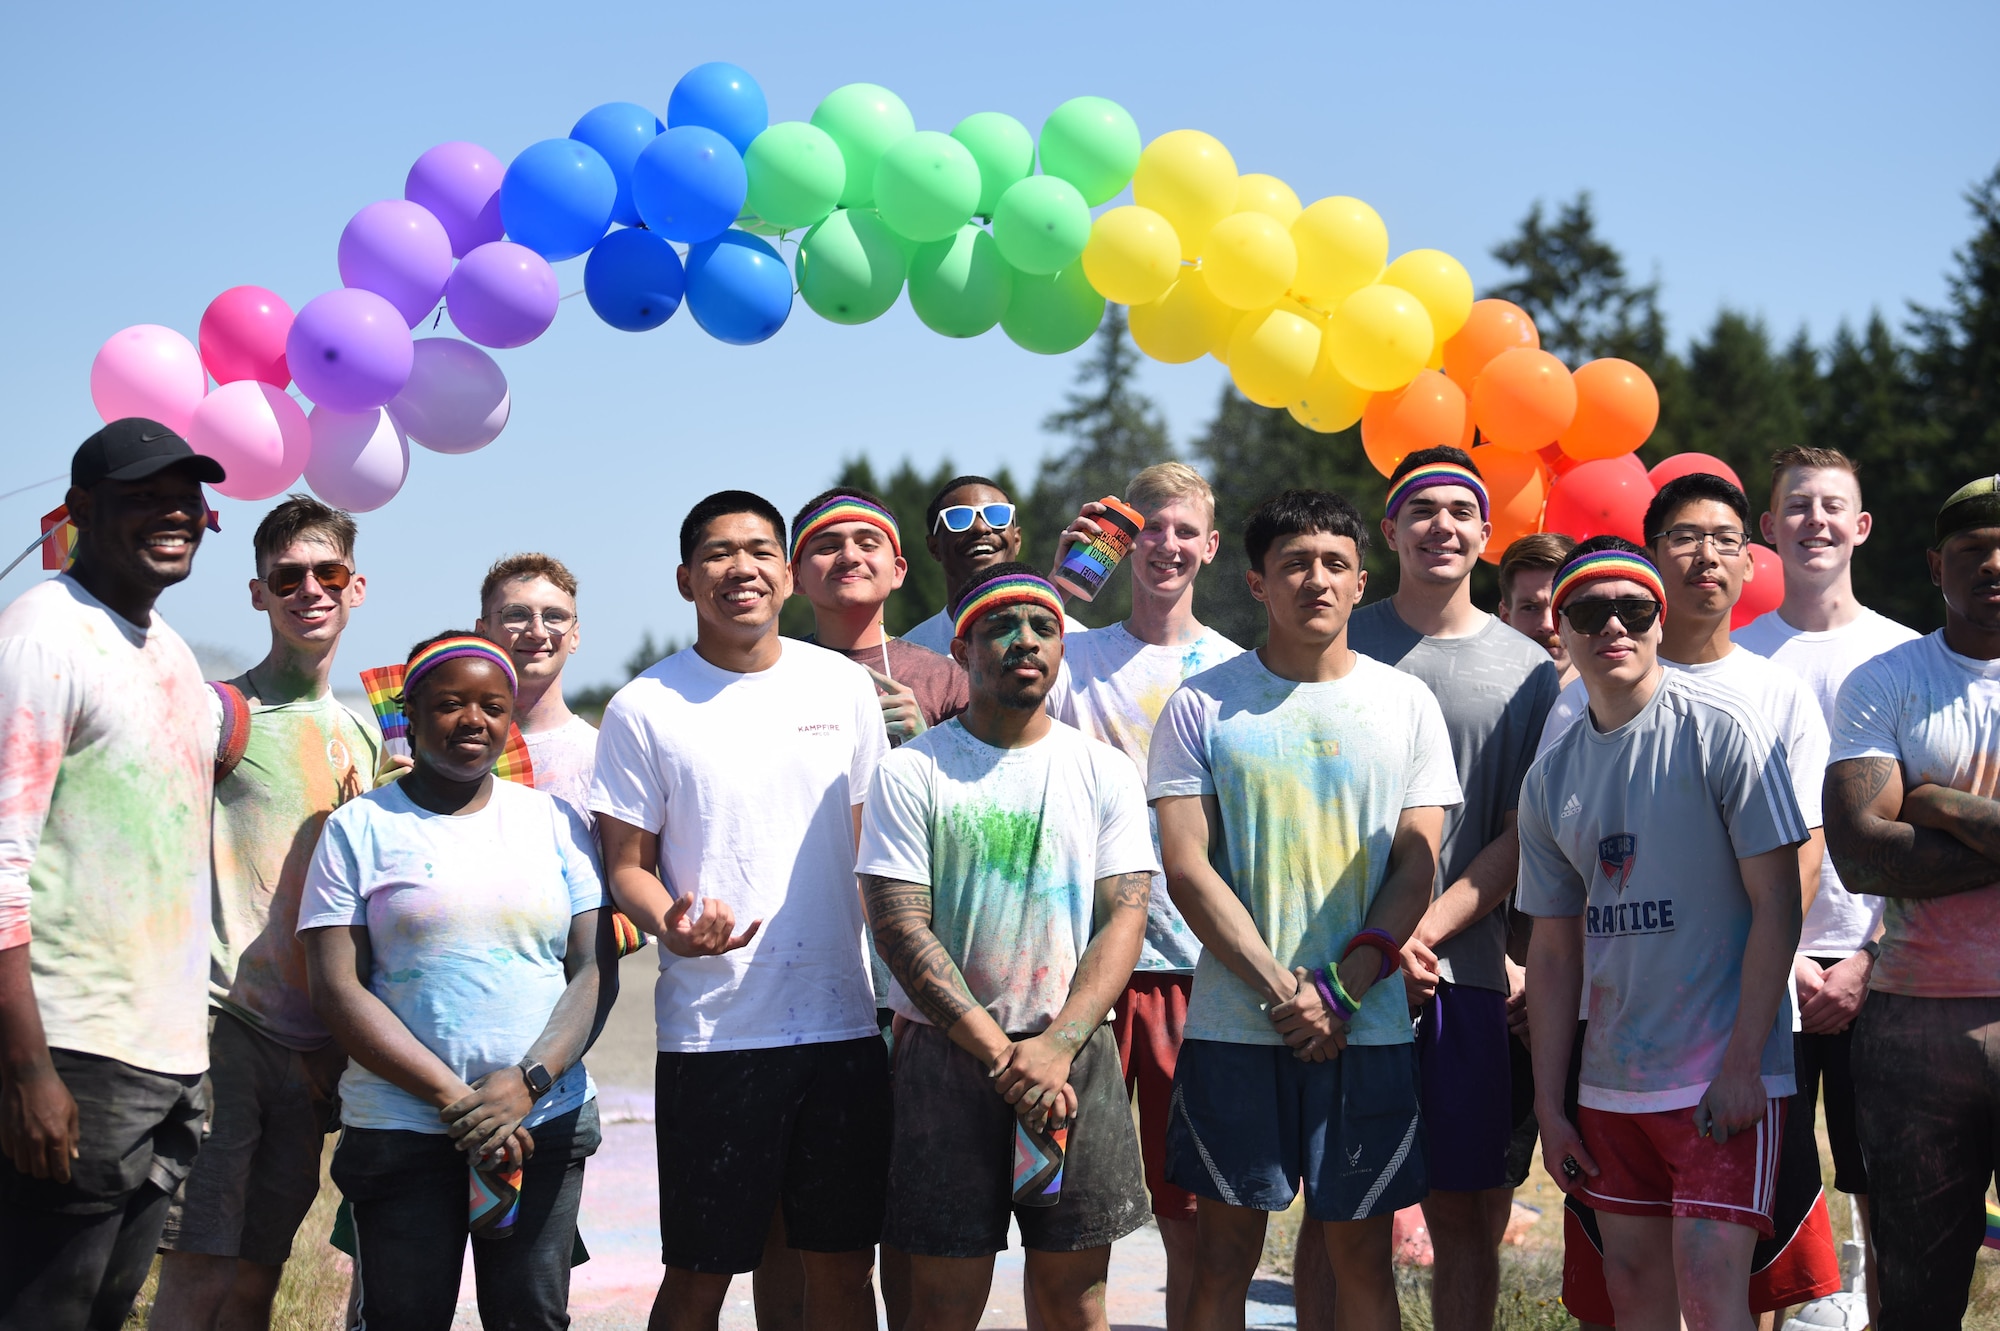 Team McChord a Rainbow Color Run 5k to recognize and celebrate diversity within the armed forces and beyond. The run was followed by a discussion panel with members of the McChord community to tell their stories. (U.S. Air Force photo by Airman 1st Class Kylee Tyus)